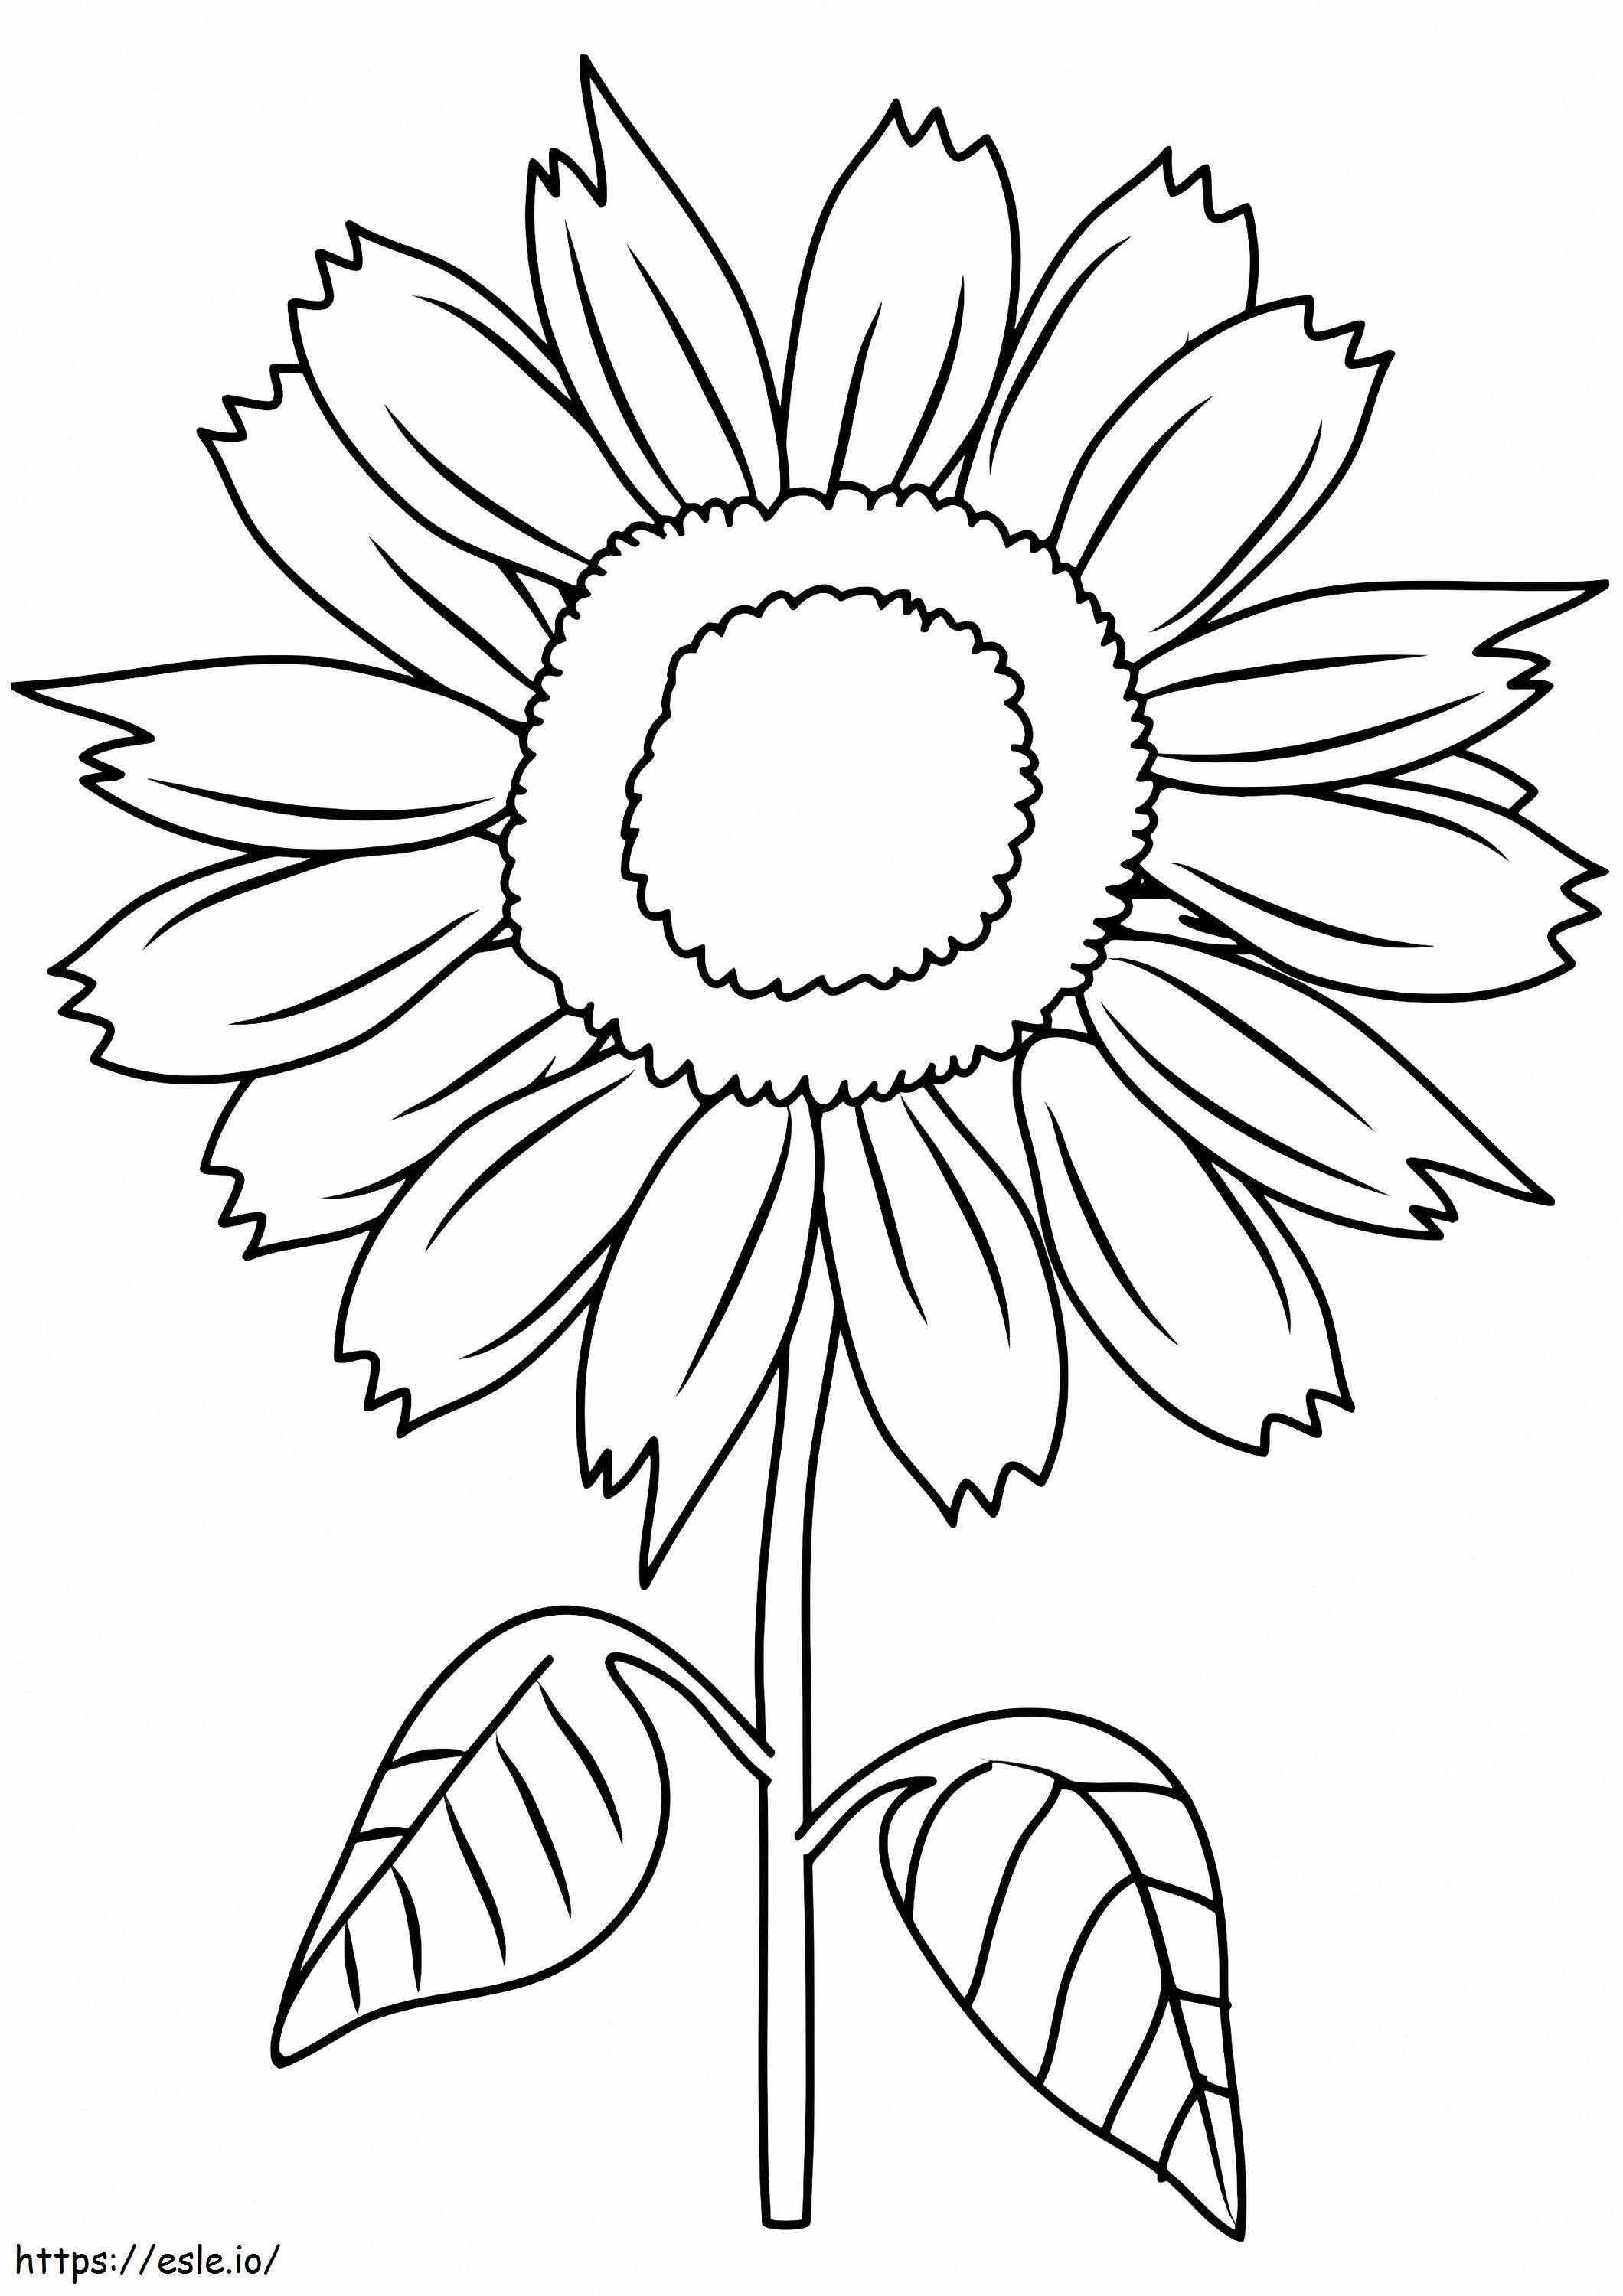 Sunny Smile Sunflower A4 coloring page